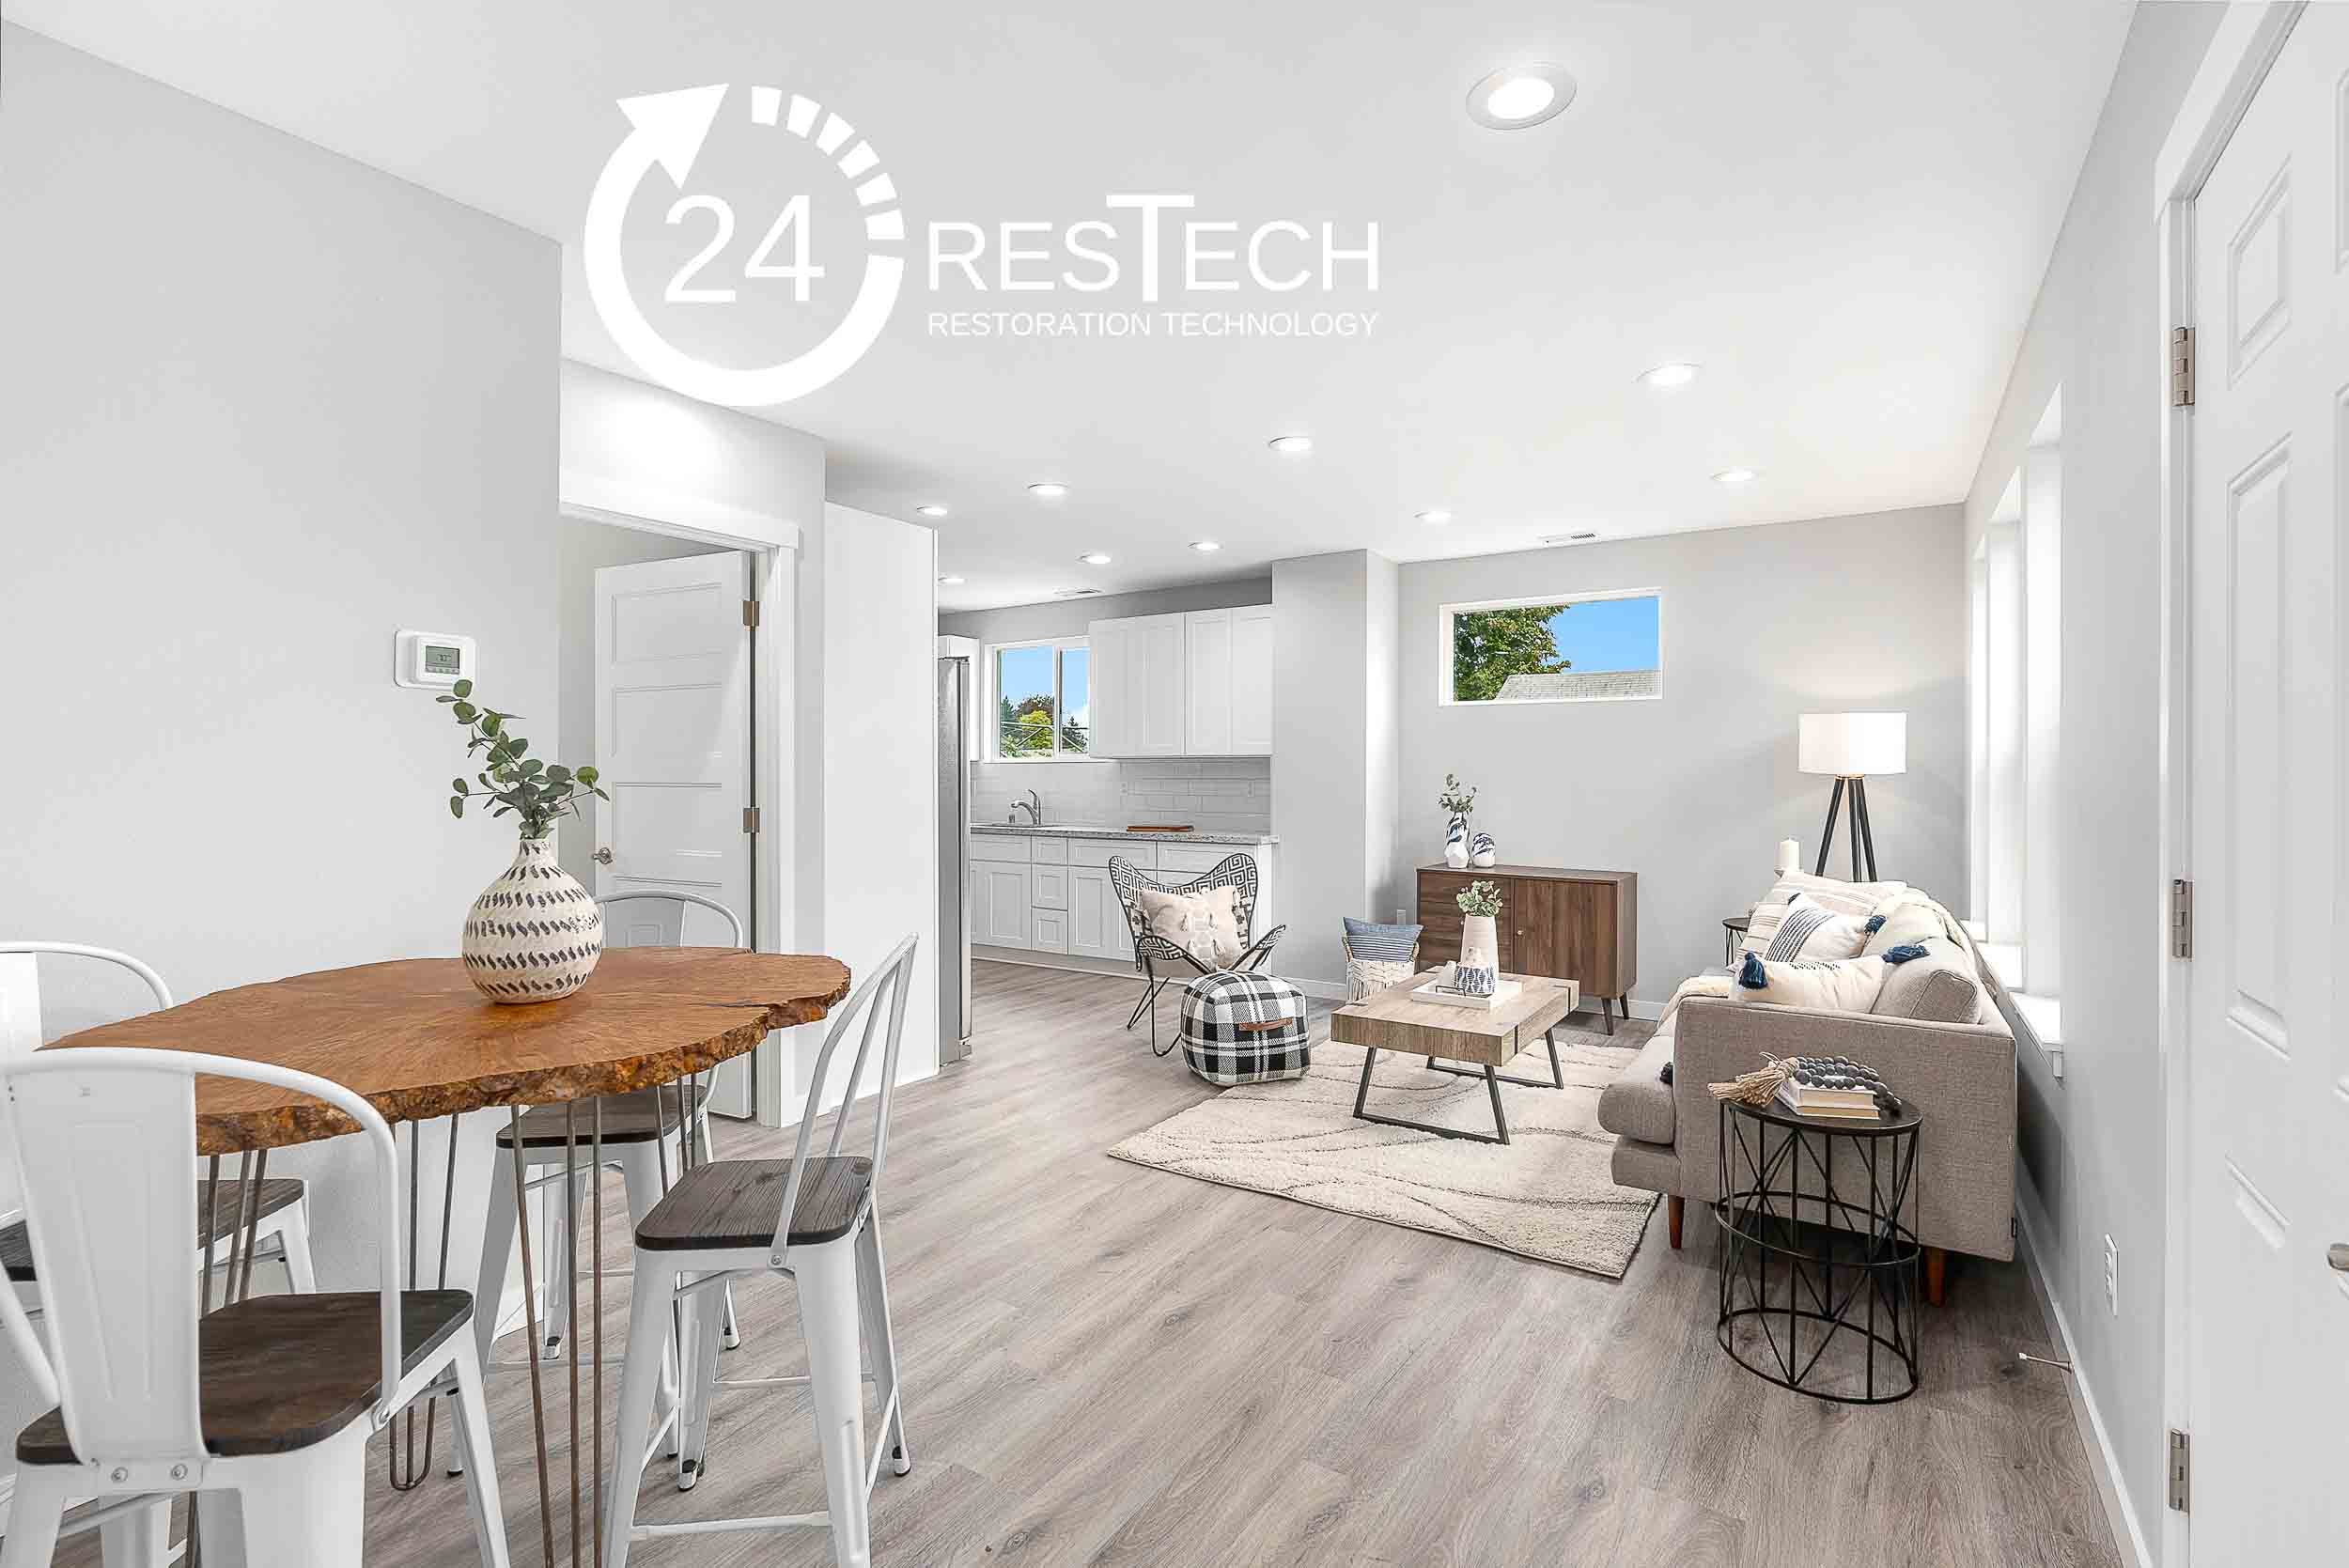  It’s true that a hole in the wall is not necessary to create an “easy, breezy” vibe in your primary living space! 24ResTech’s fire damage restoration specialists built-out a living room complete with new paint, recessed lighting, walls, layout, floo